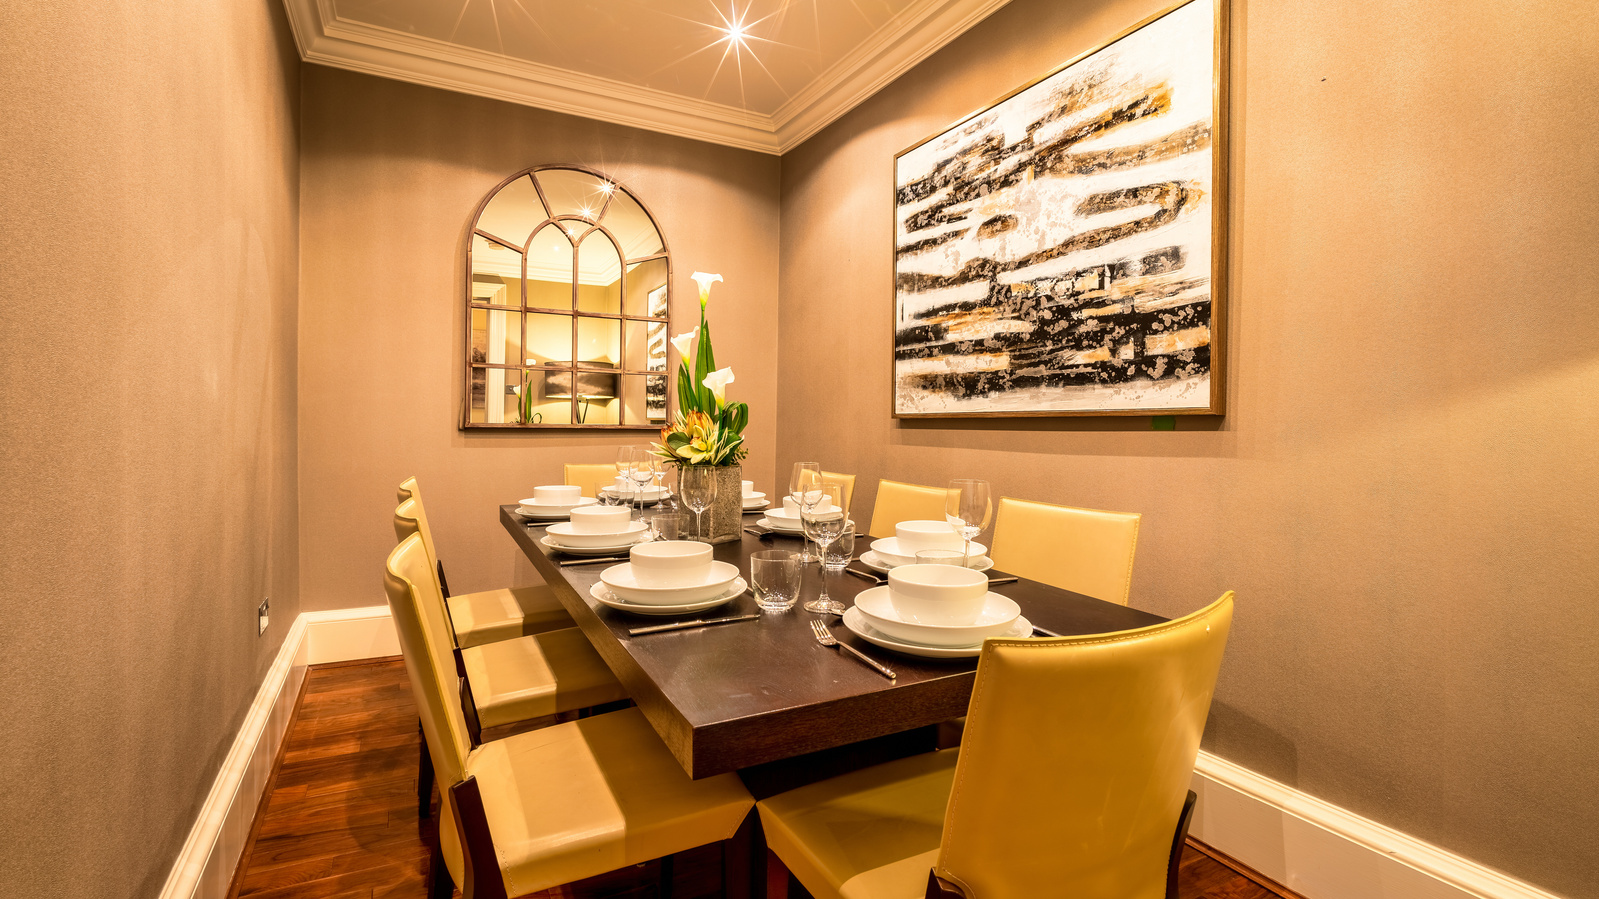 Dining Room for Scotland Interior Property - Photography by Nate Cleary